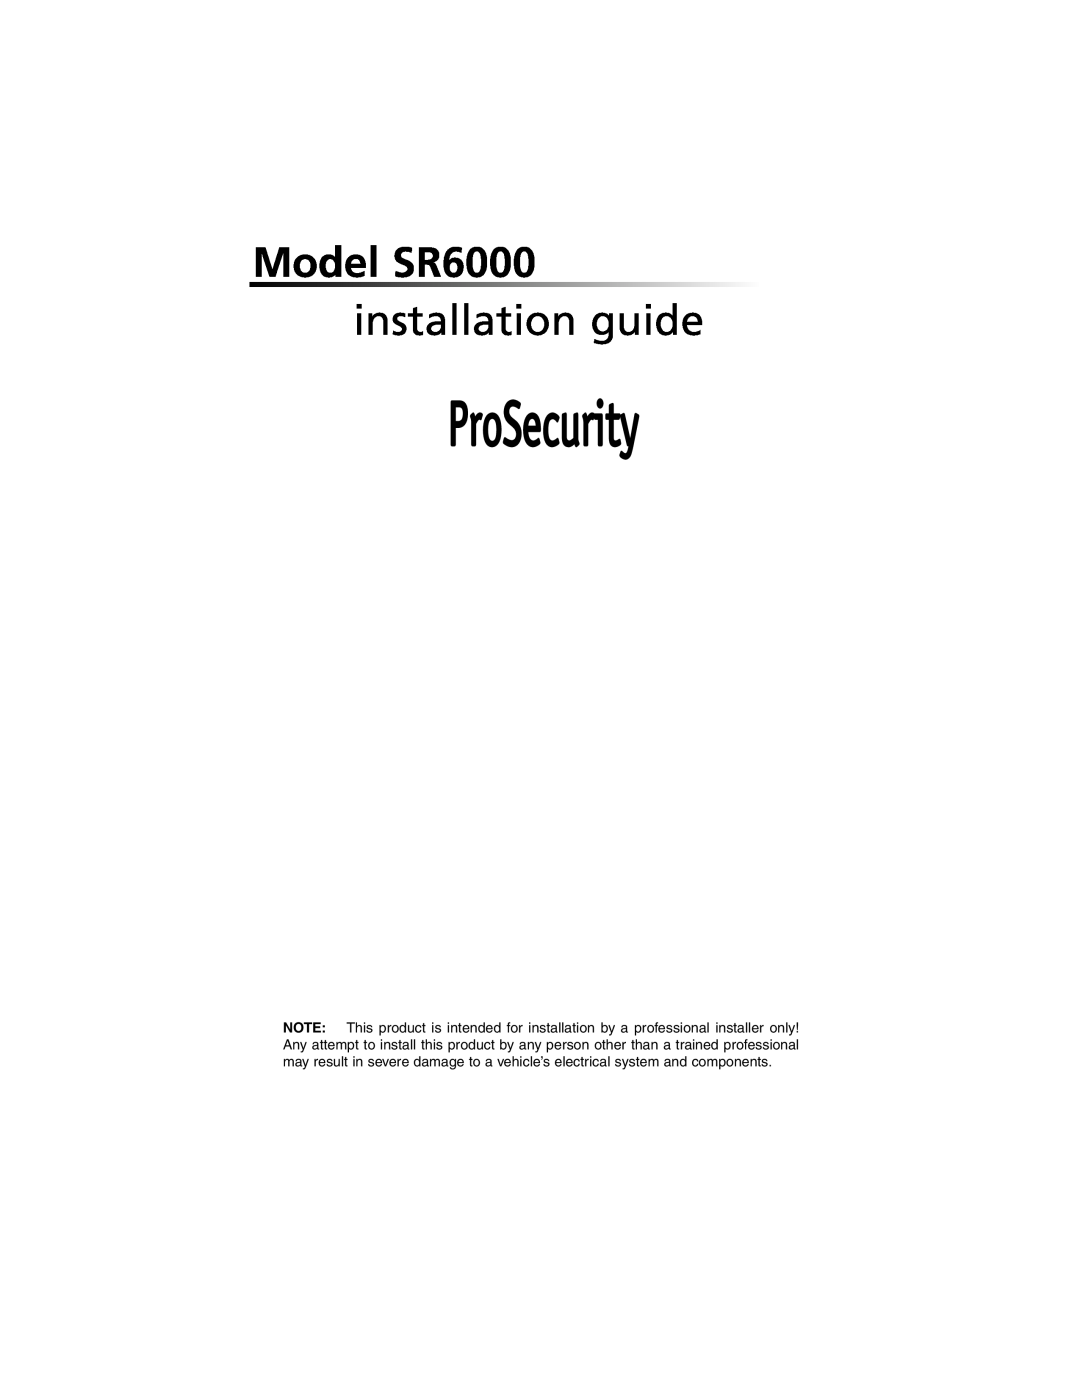 Directed Electronics manual ProSecurity, Model SR6000, installation guide 